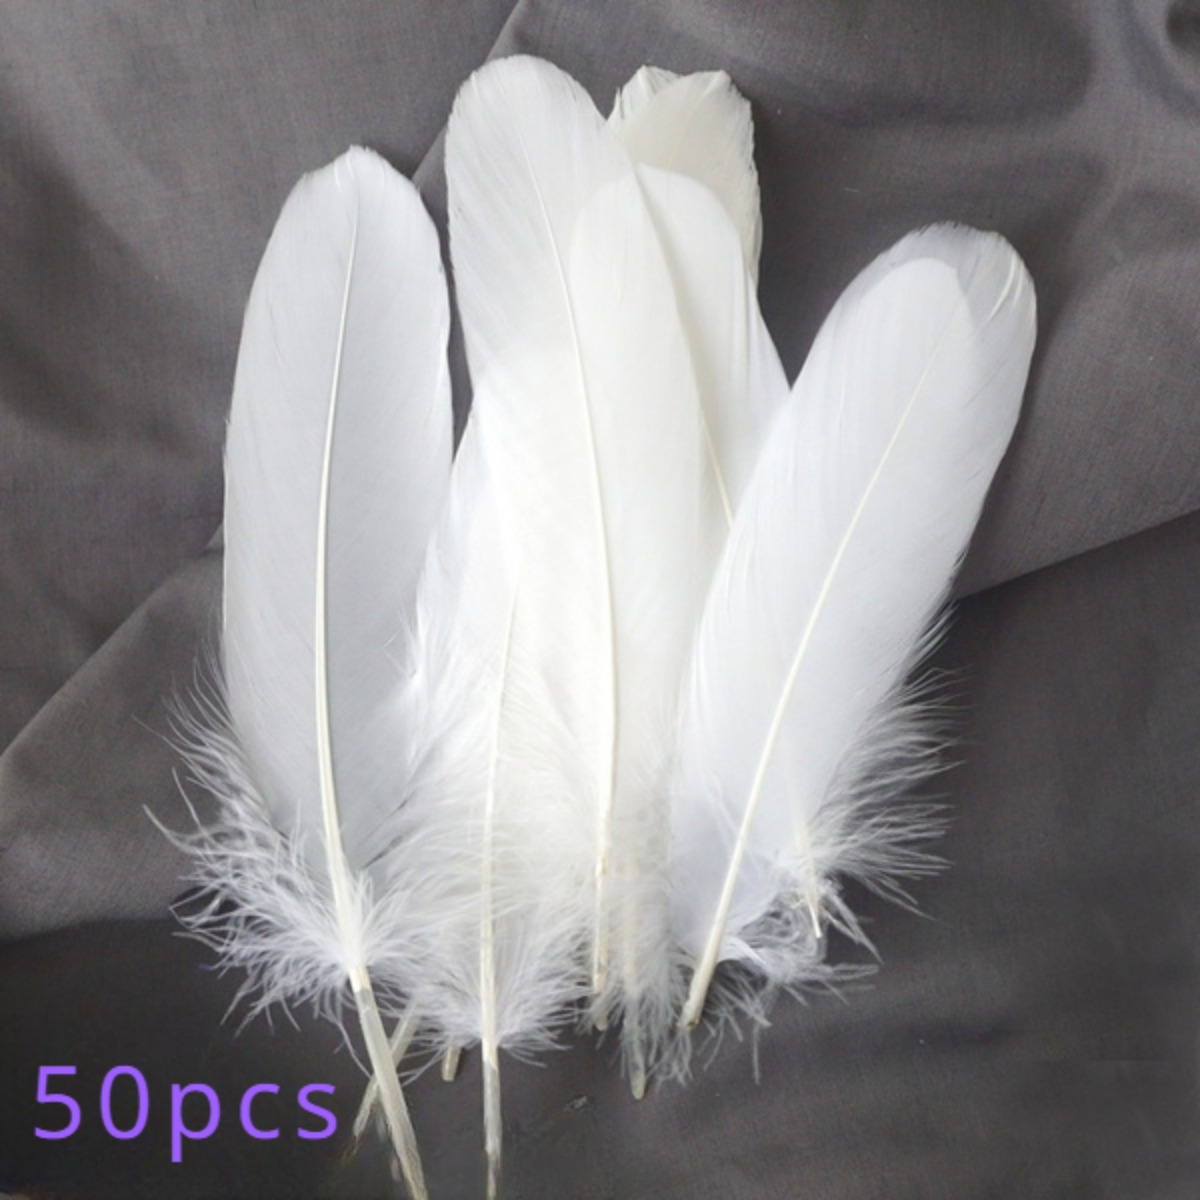 300pcs Feathers White, Natural Craft Goose Feathers, For Costume, Bags,  Earrings